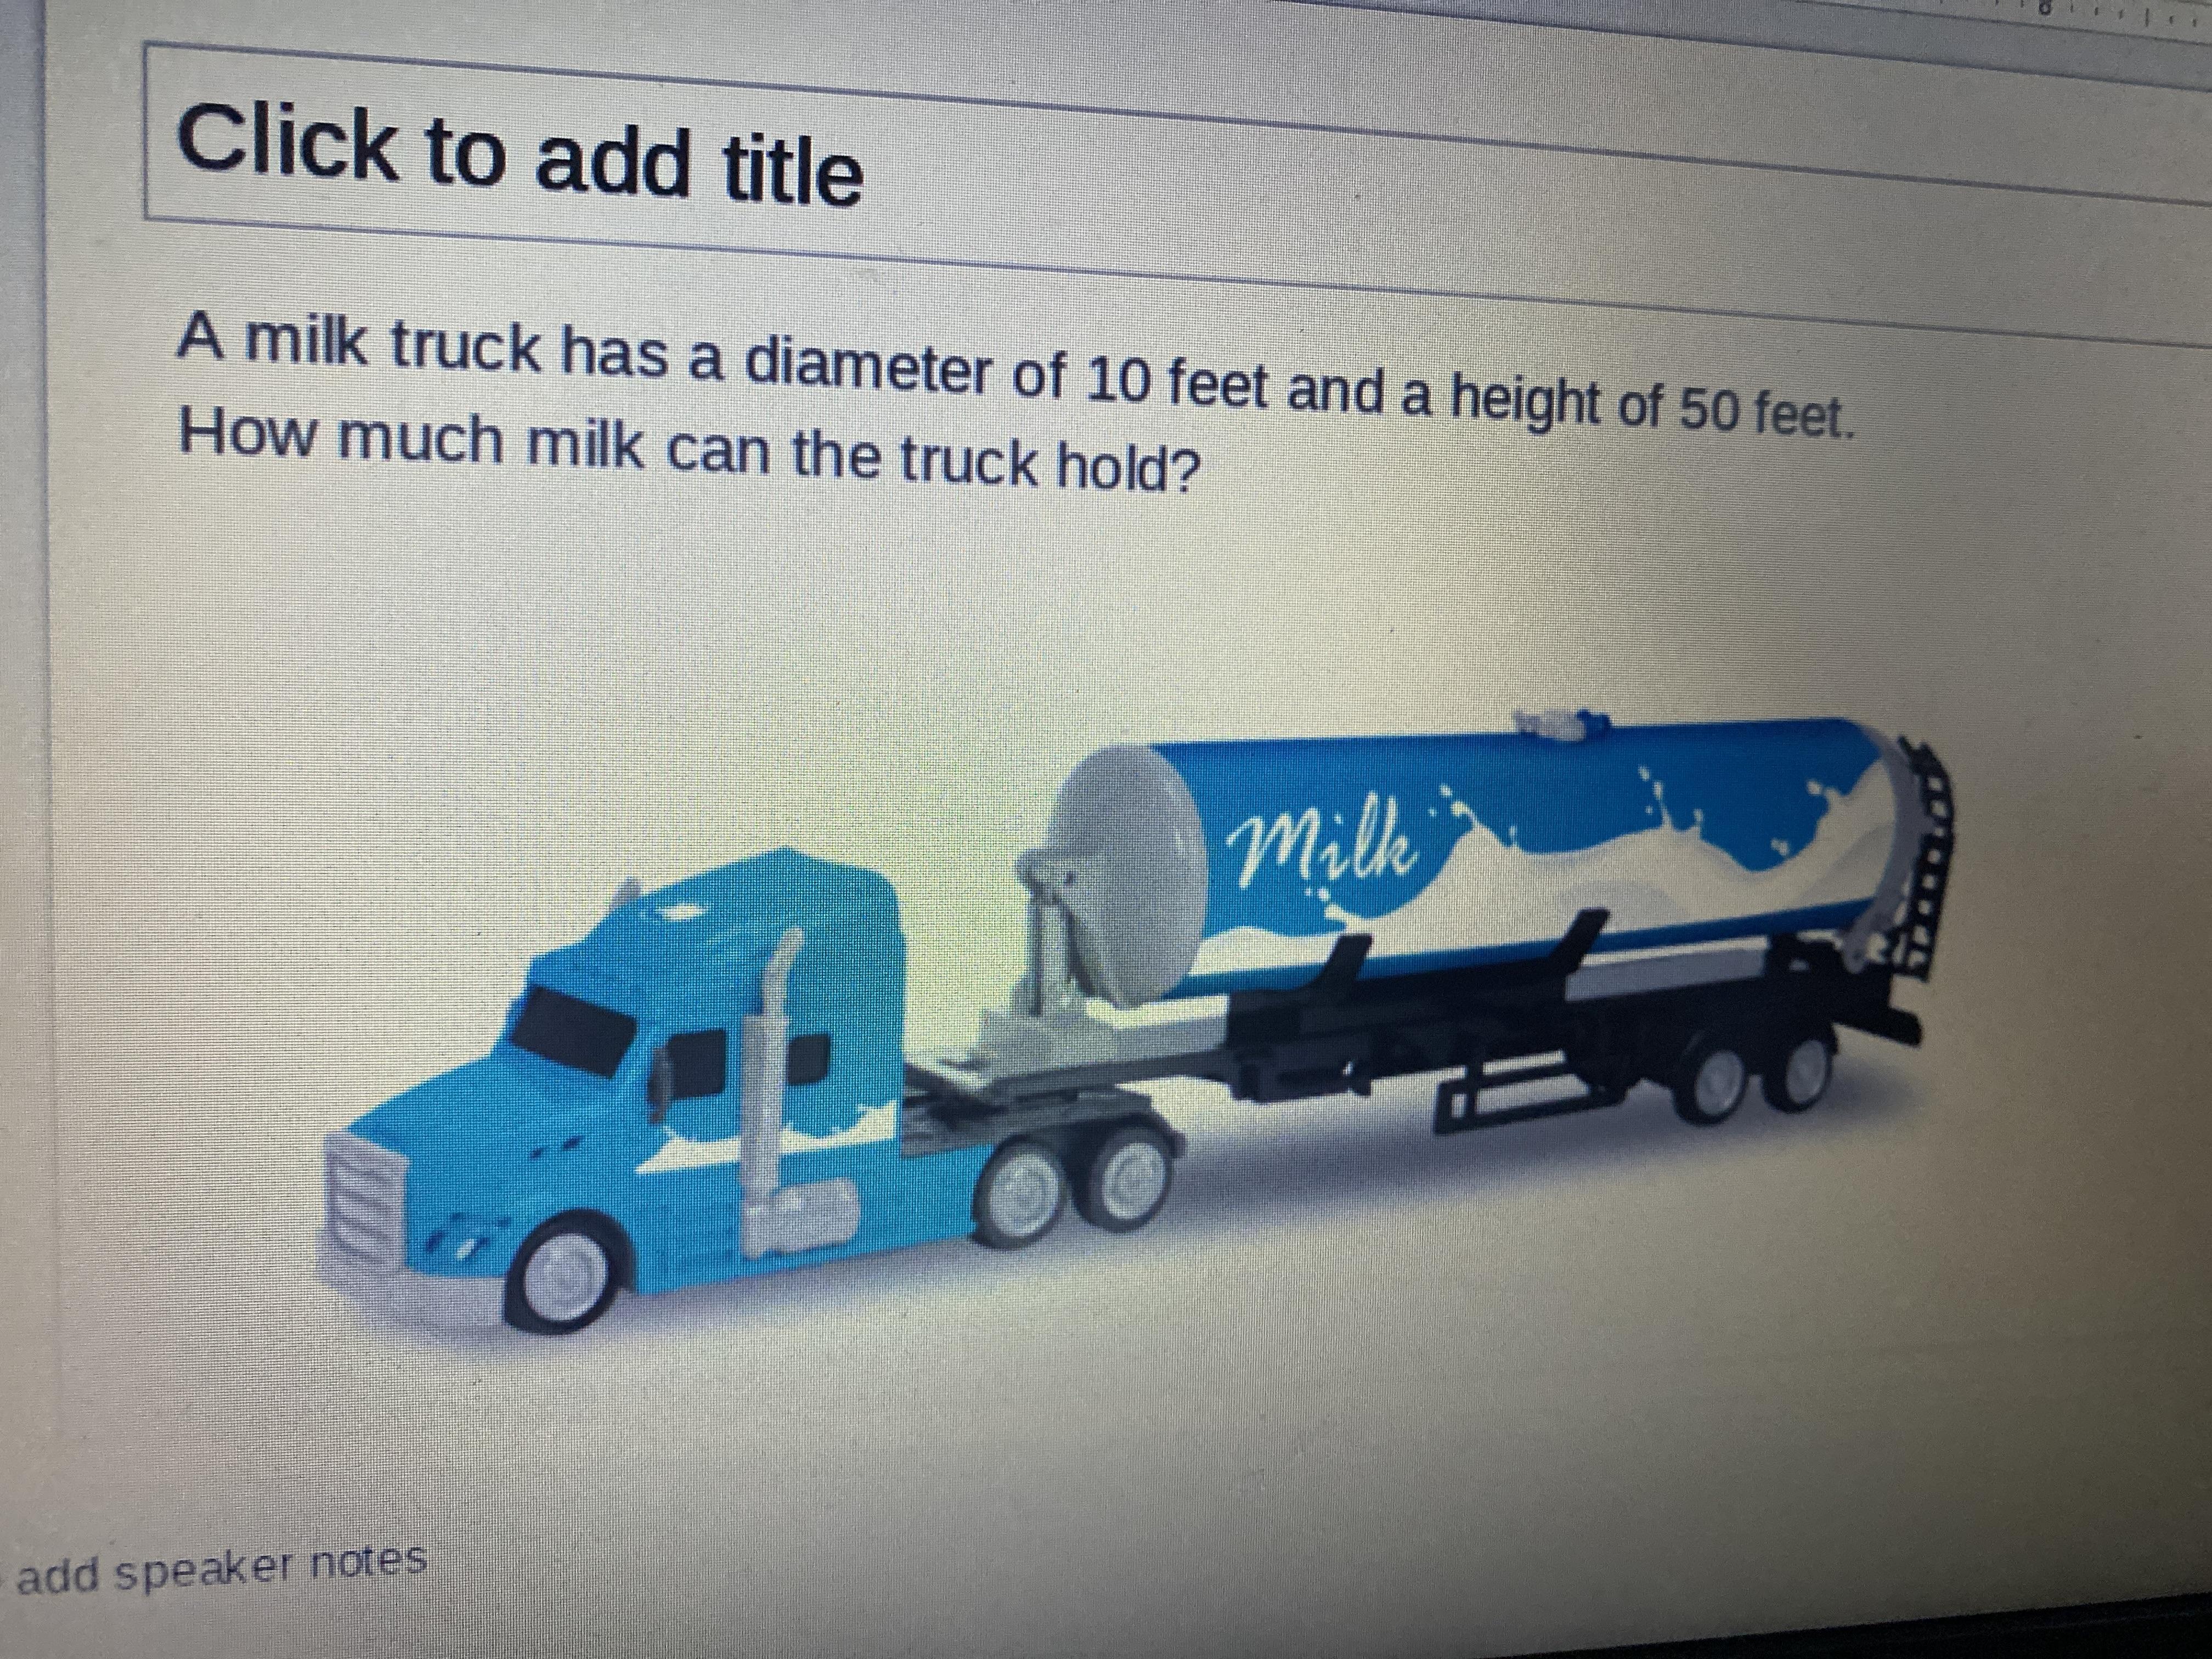 A Milk Truck Has A Diameter Of 10 And Feet And A Height Of 50 Feet. How Much Milk Can The Truck Hold?